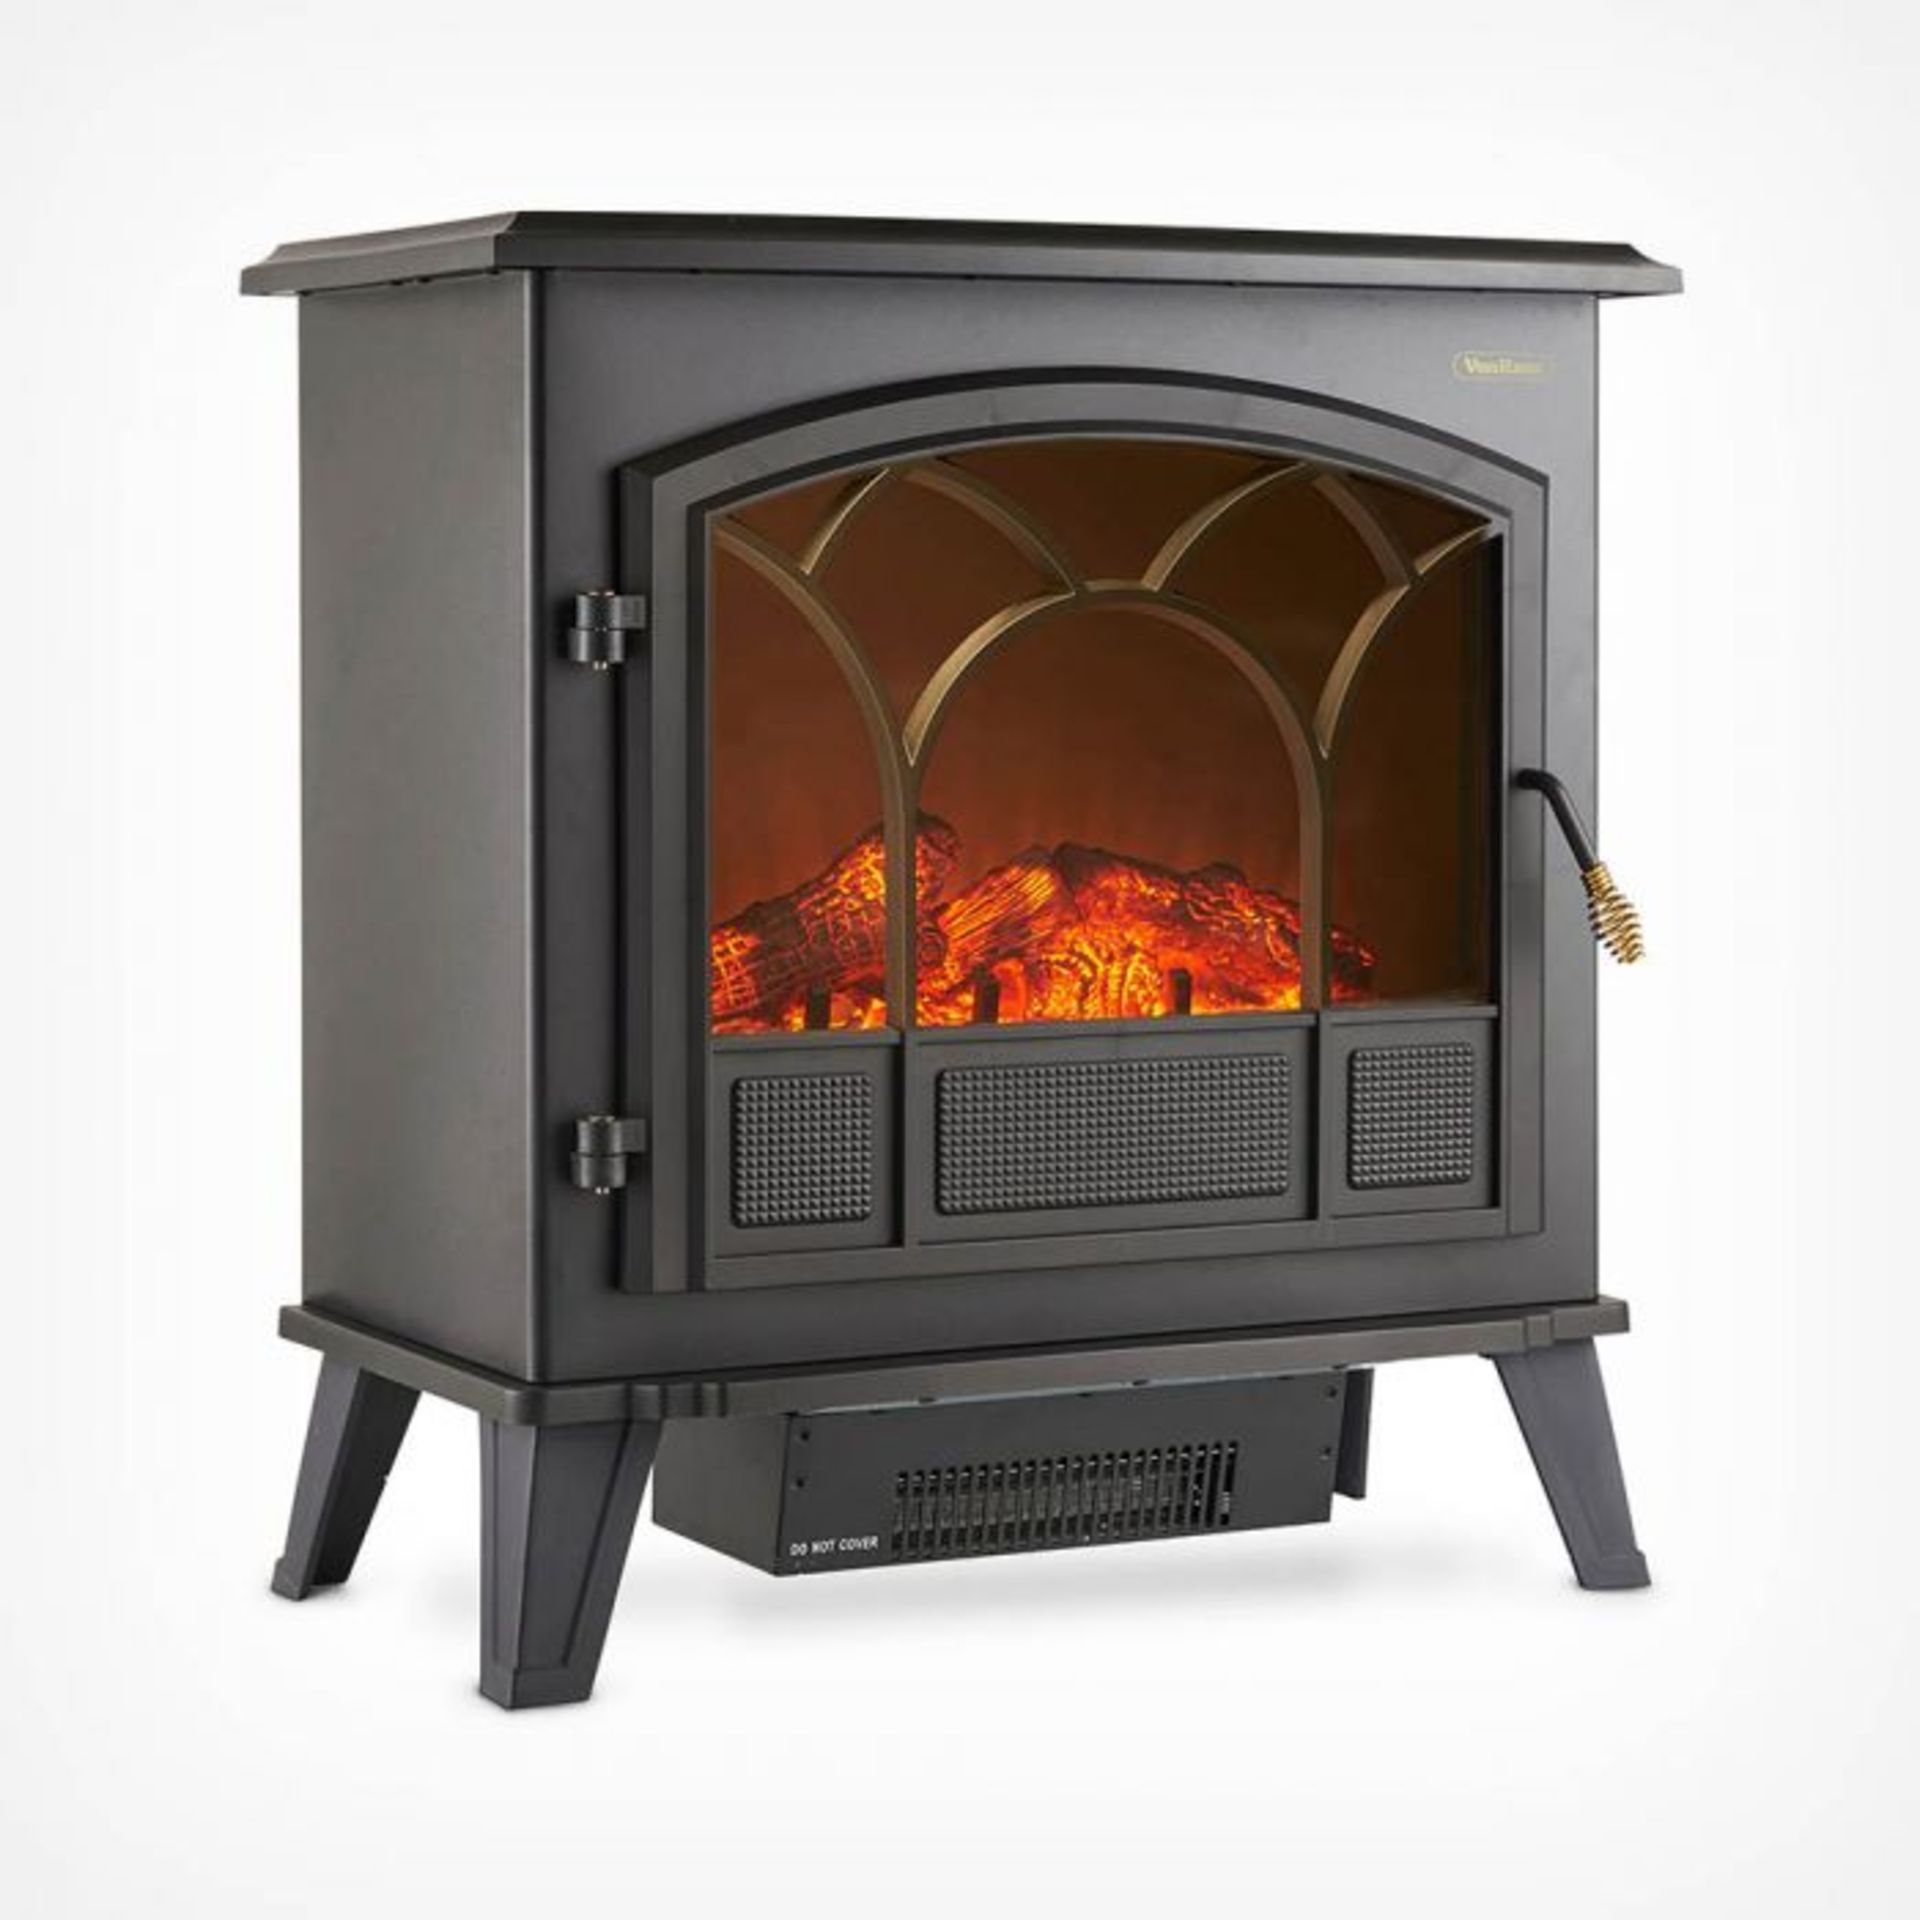 (V41) 1850W Large Black Stove Heater 1850W PORTABLE ELECTRIC STOVE HEATER – classically-desi... - Image 2 of 4